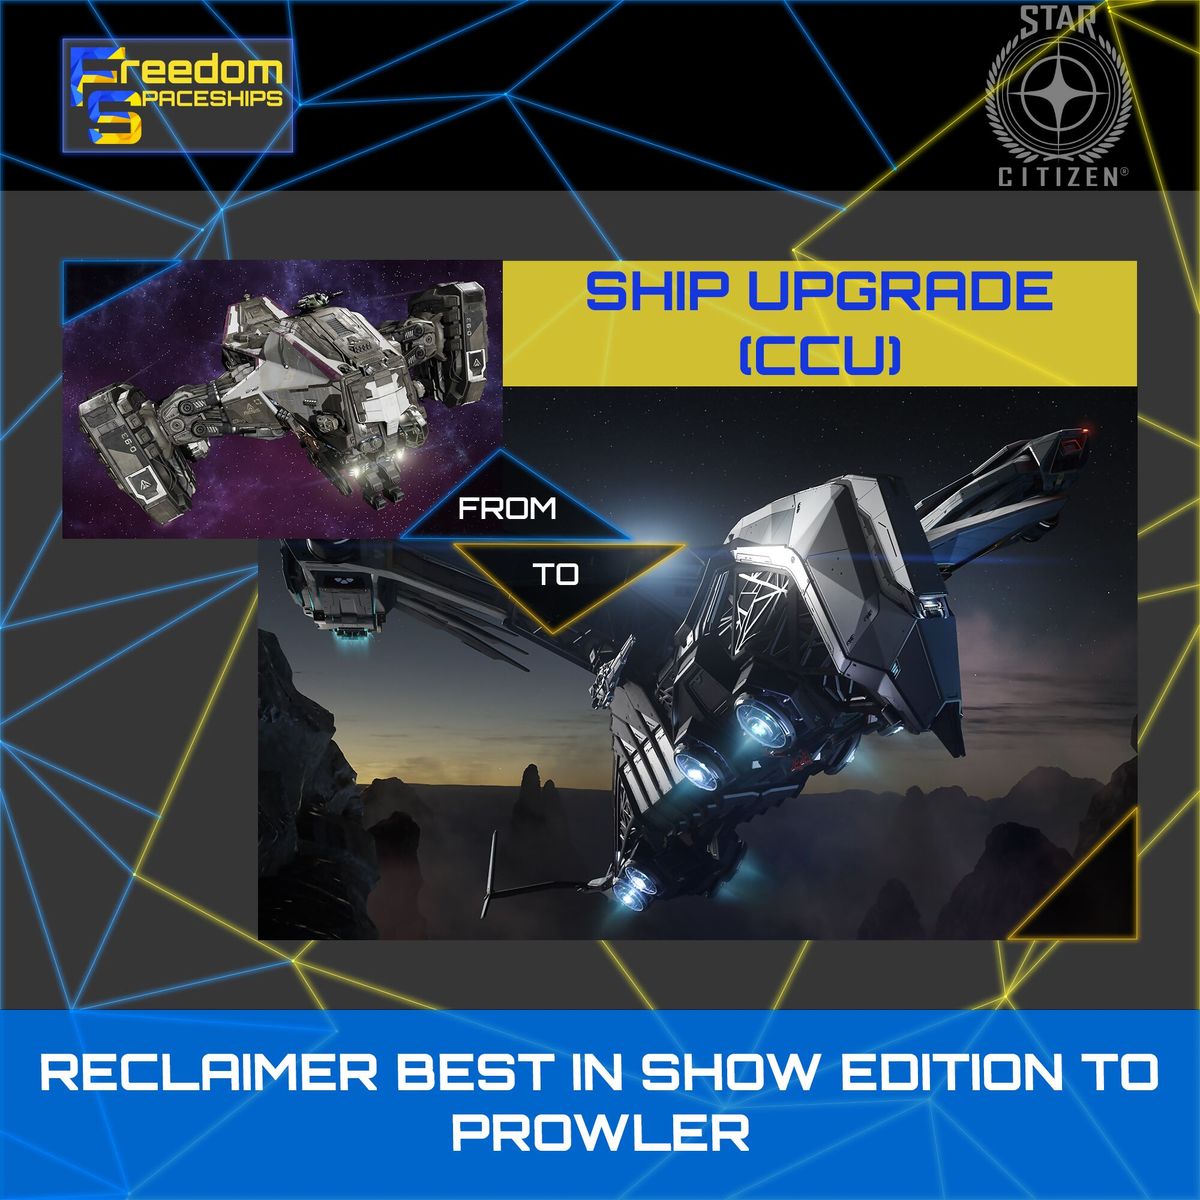 Upgrade - Reclaimer Best In Show Edition to Prowler